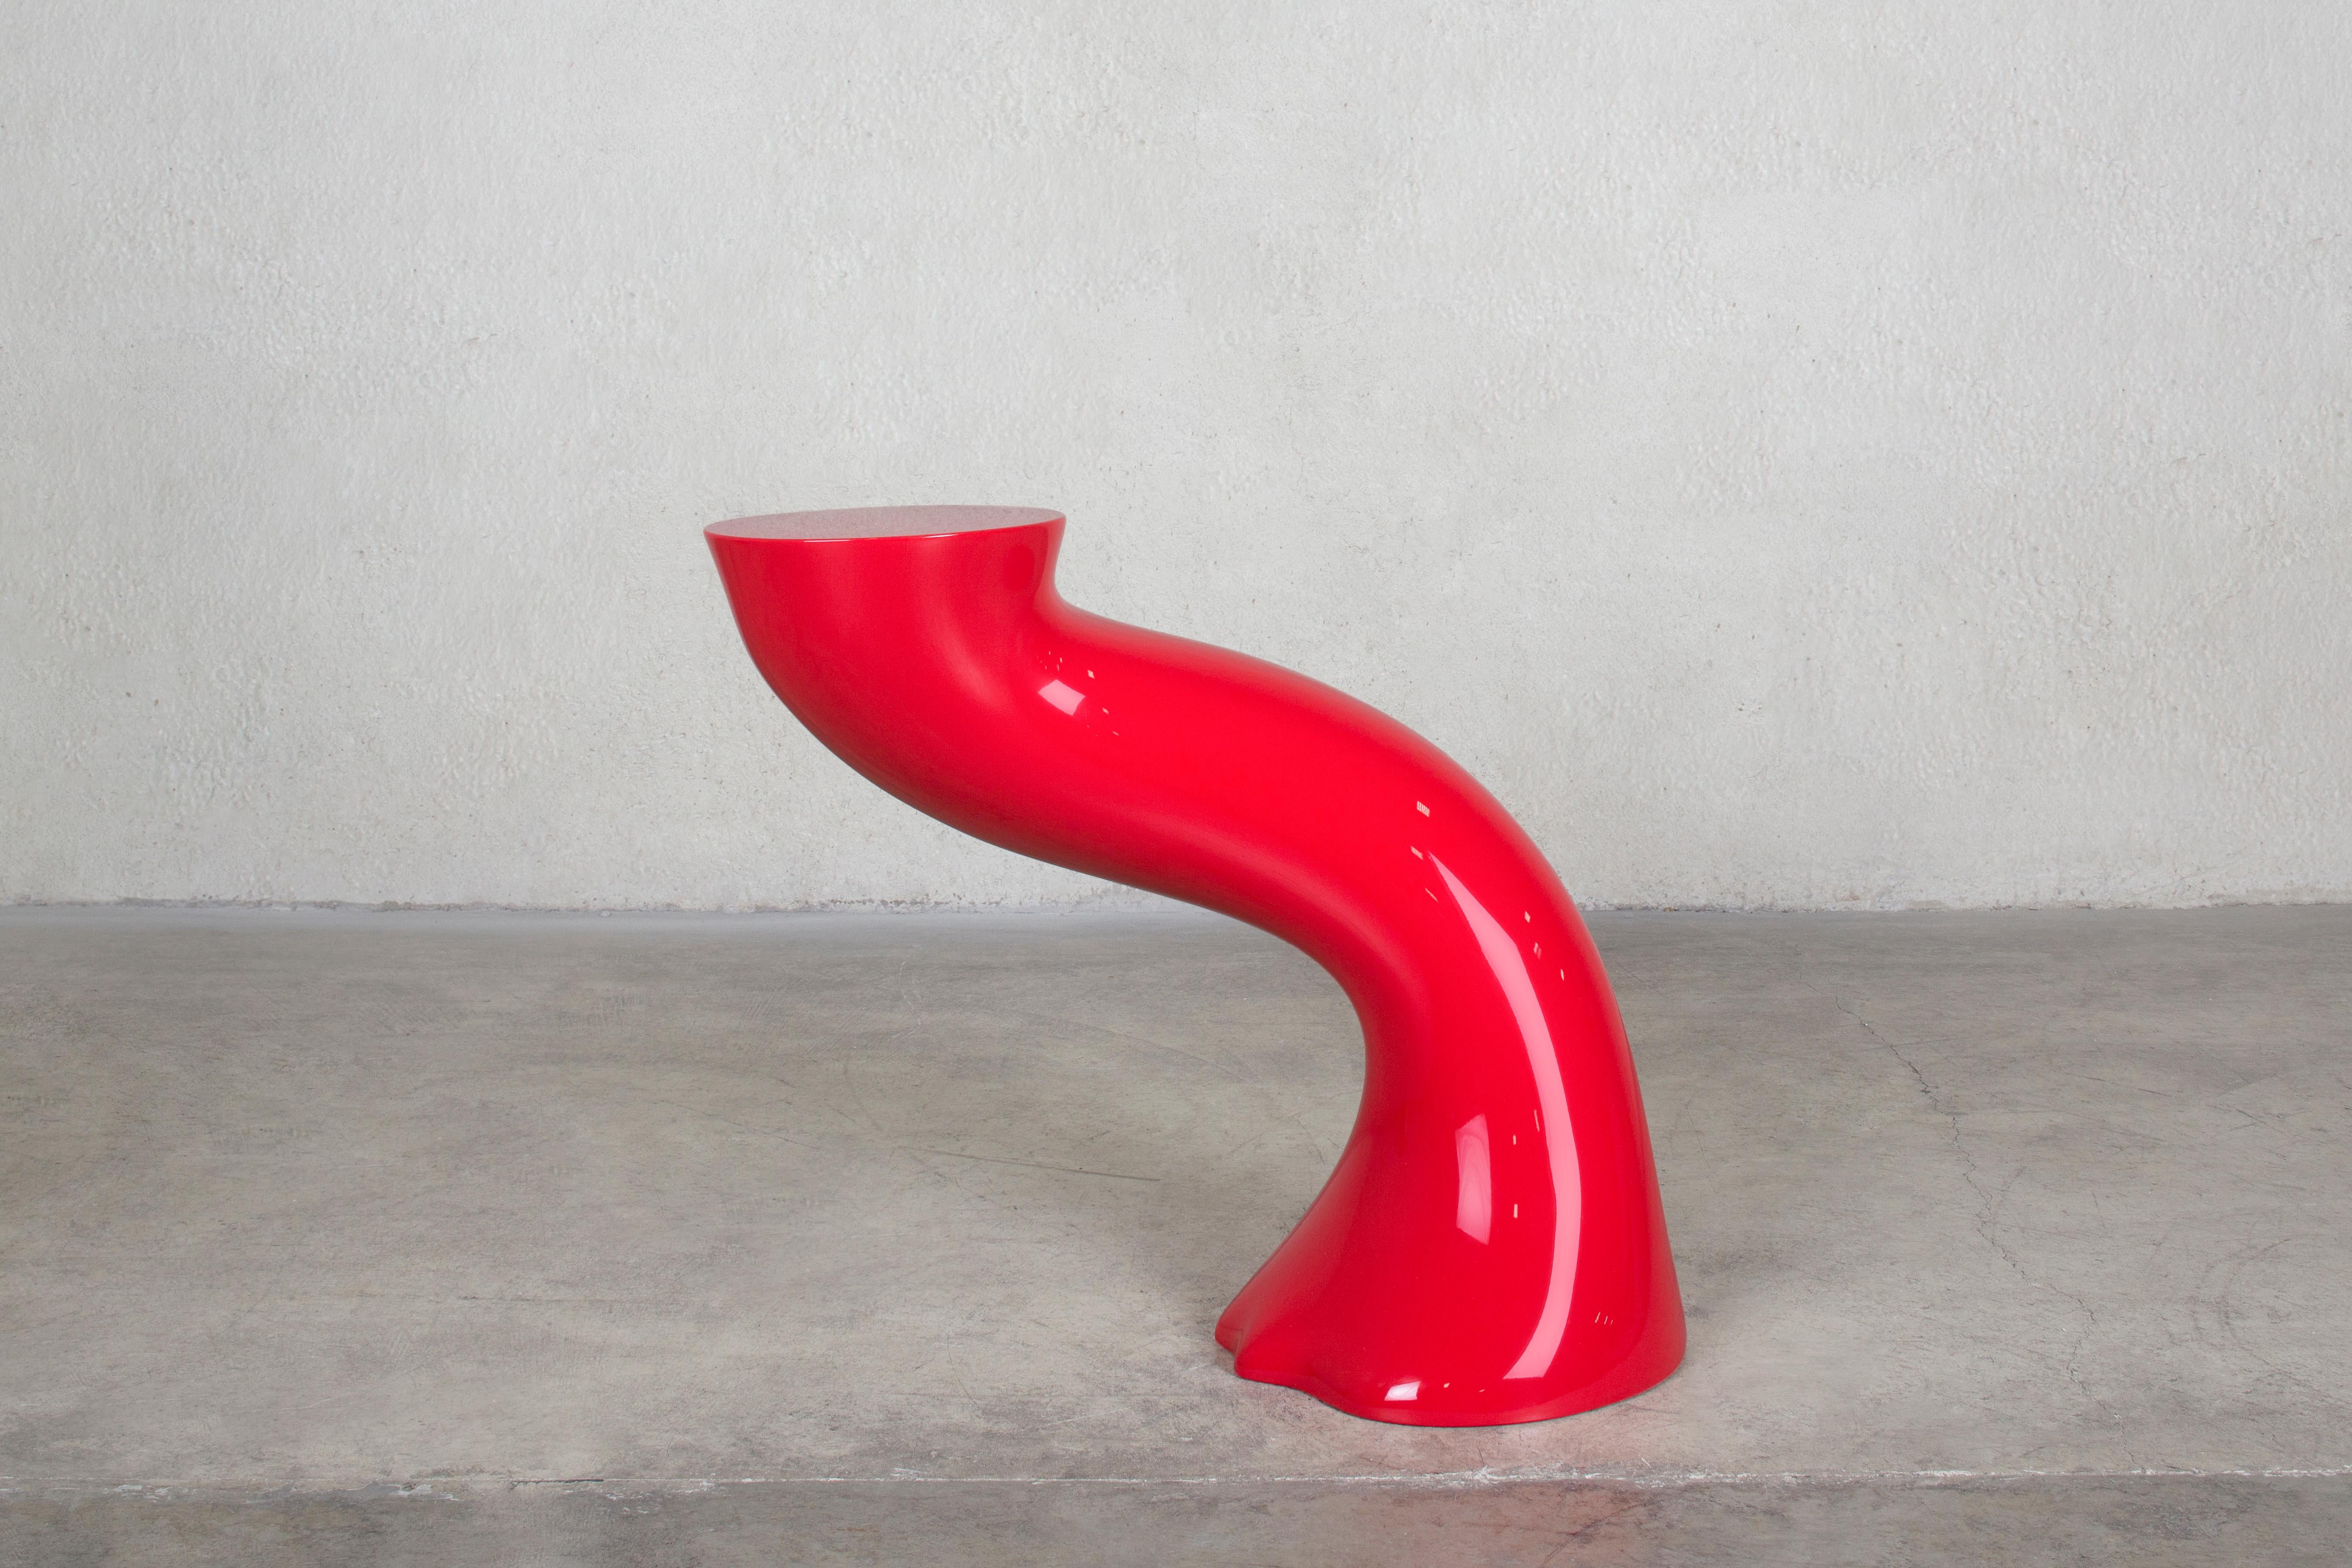 Wendell Castle, [American, 1932-2018]
Curving table no. 8, 1969 circa
Gel-coated fiberglass, wood, and automobile paint
Measures: 27.5 x 32.5 x 15.5 inches
69.9 x 82.6 x 39.4 cm

Born in Kansas, Wendell Castle (1932-2018) received a B.F.A.